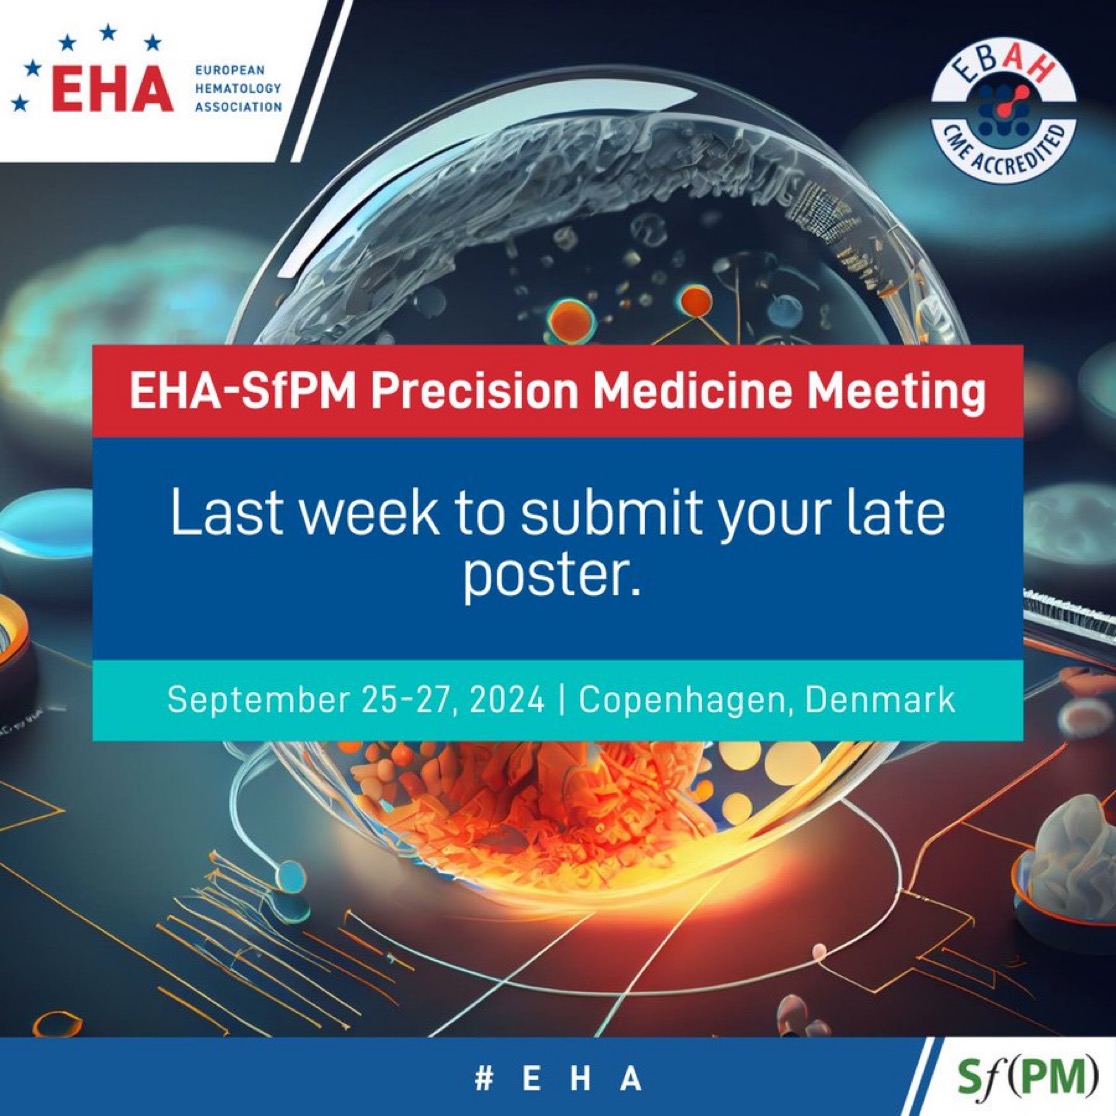 European Hematology Association – Final call to submit late posters for the EHA-SFPM Precision Medicine Meeting